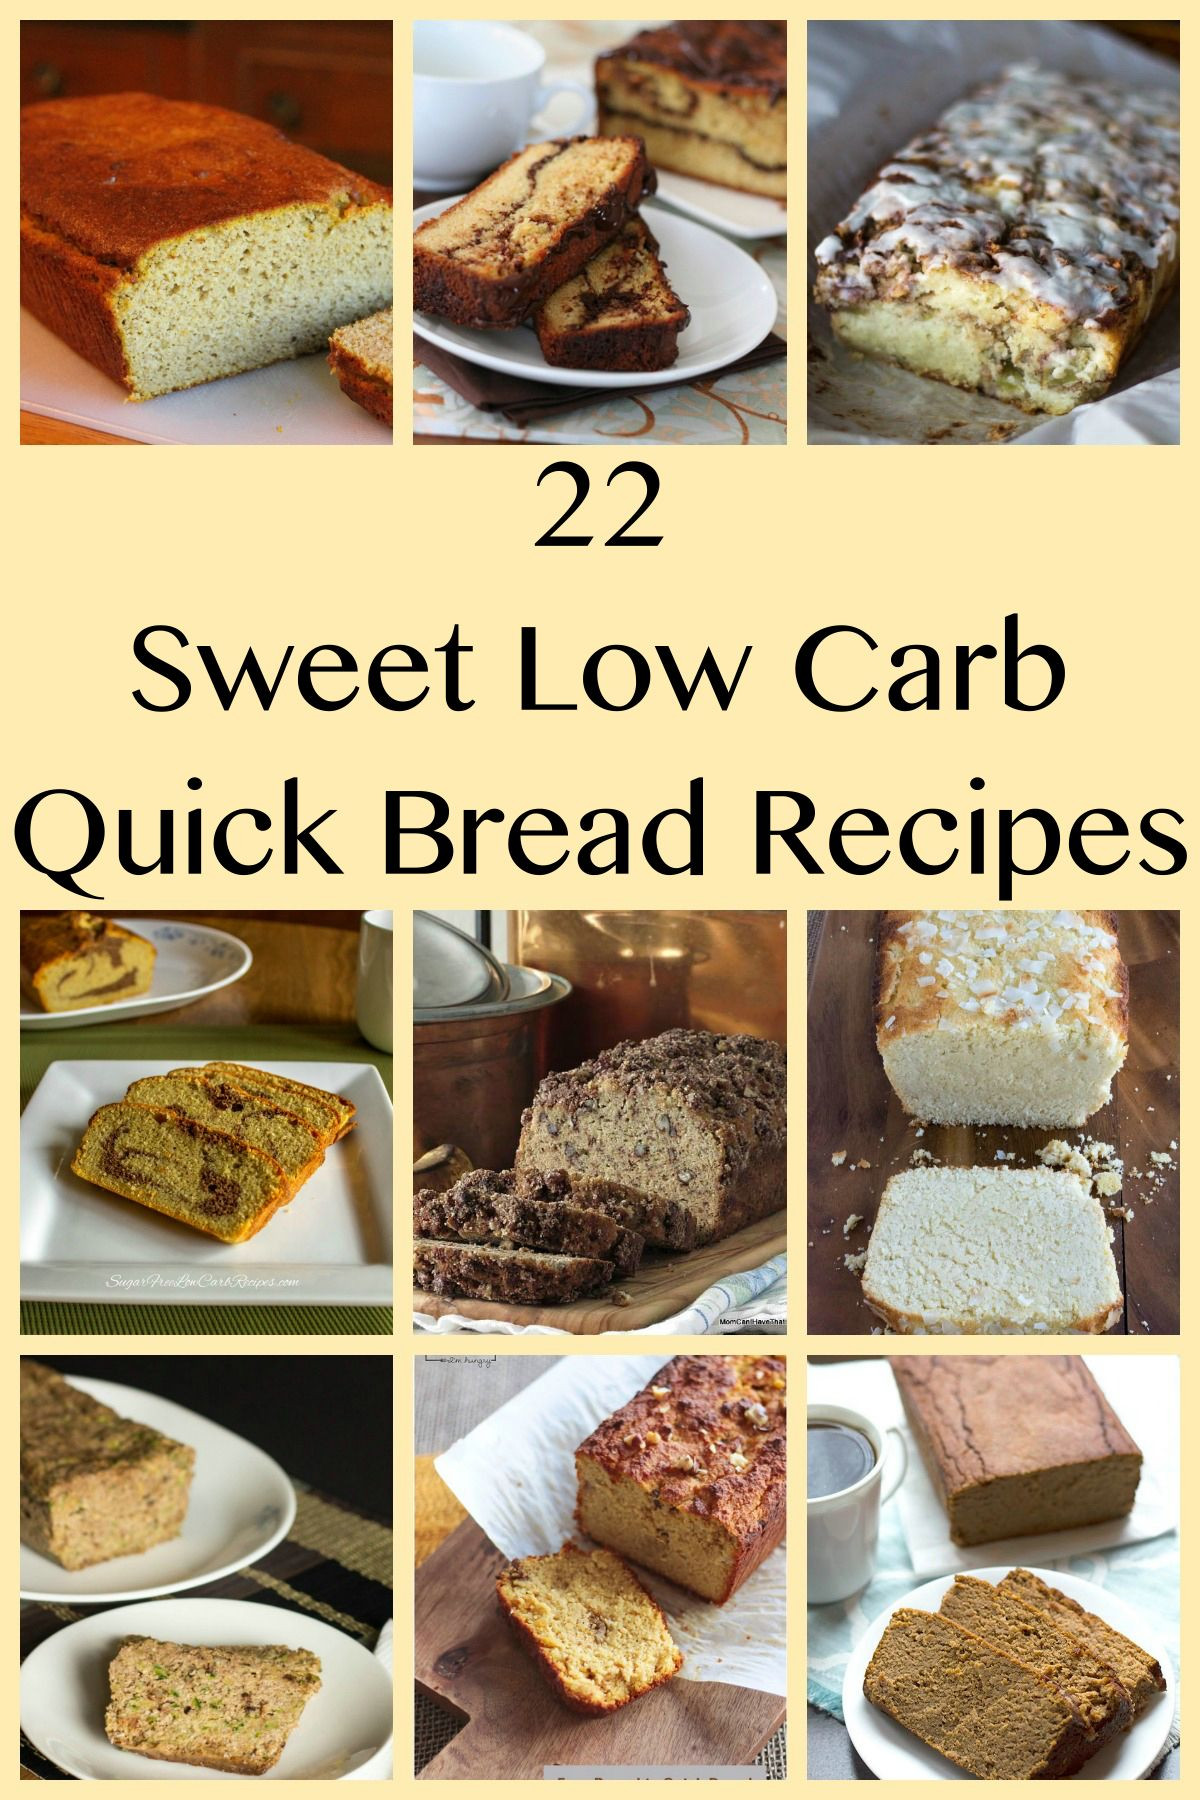 Healthy Low Carb Bread
 A collection of 22 low carb sweet quick bread recipes